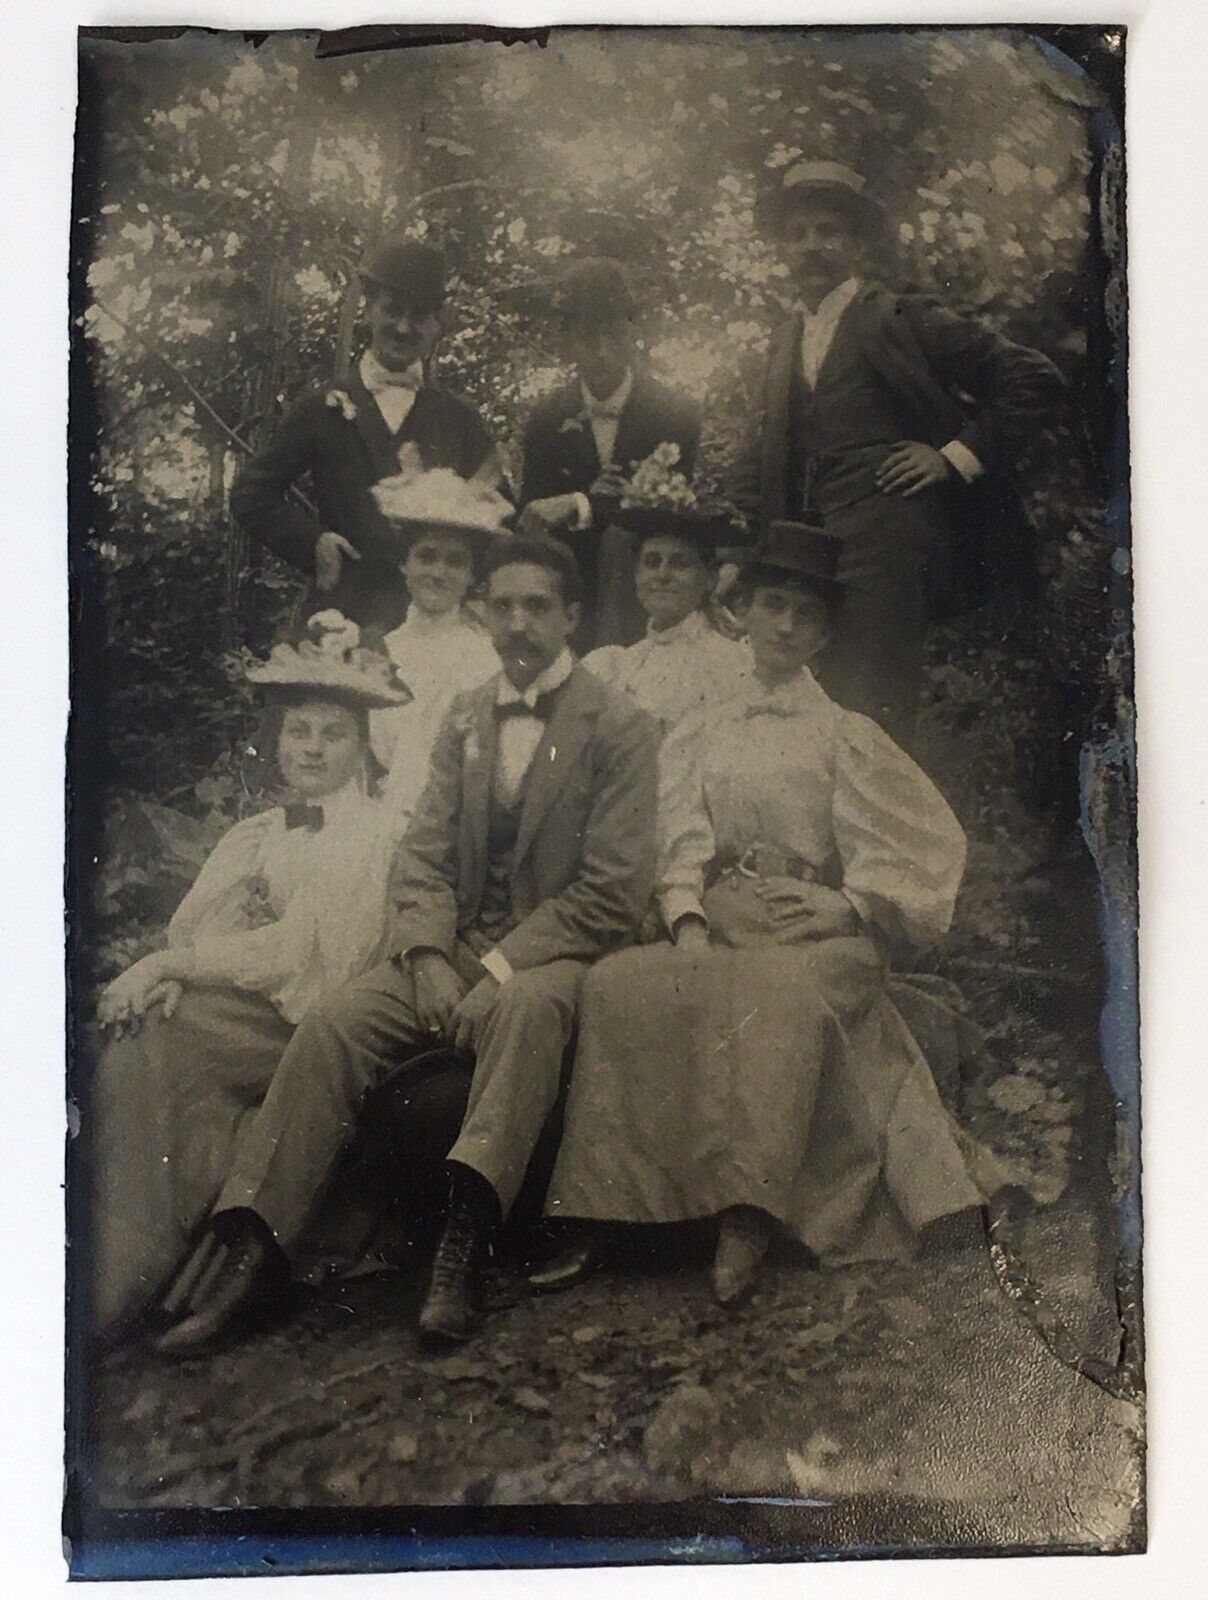 Antique Victorian Era Tintype Photo of Men and Lovely Ladies Outdoors Outside